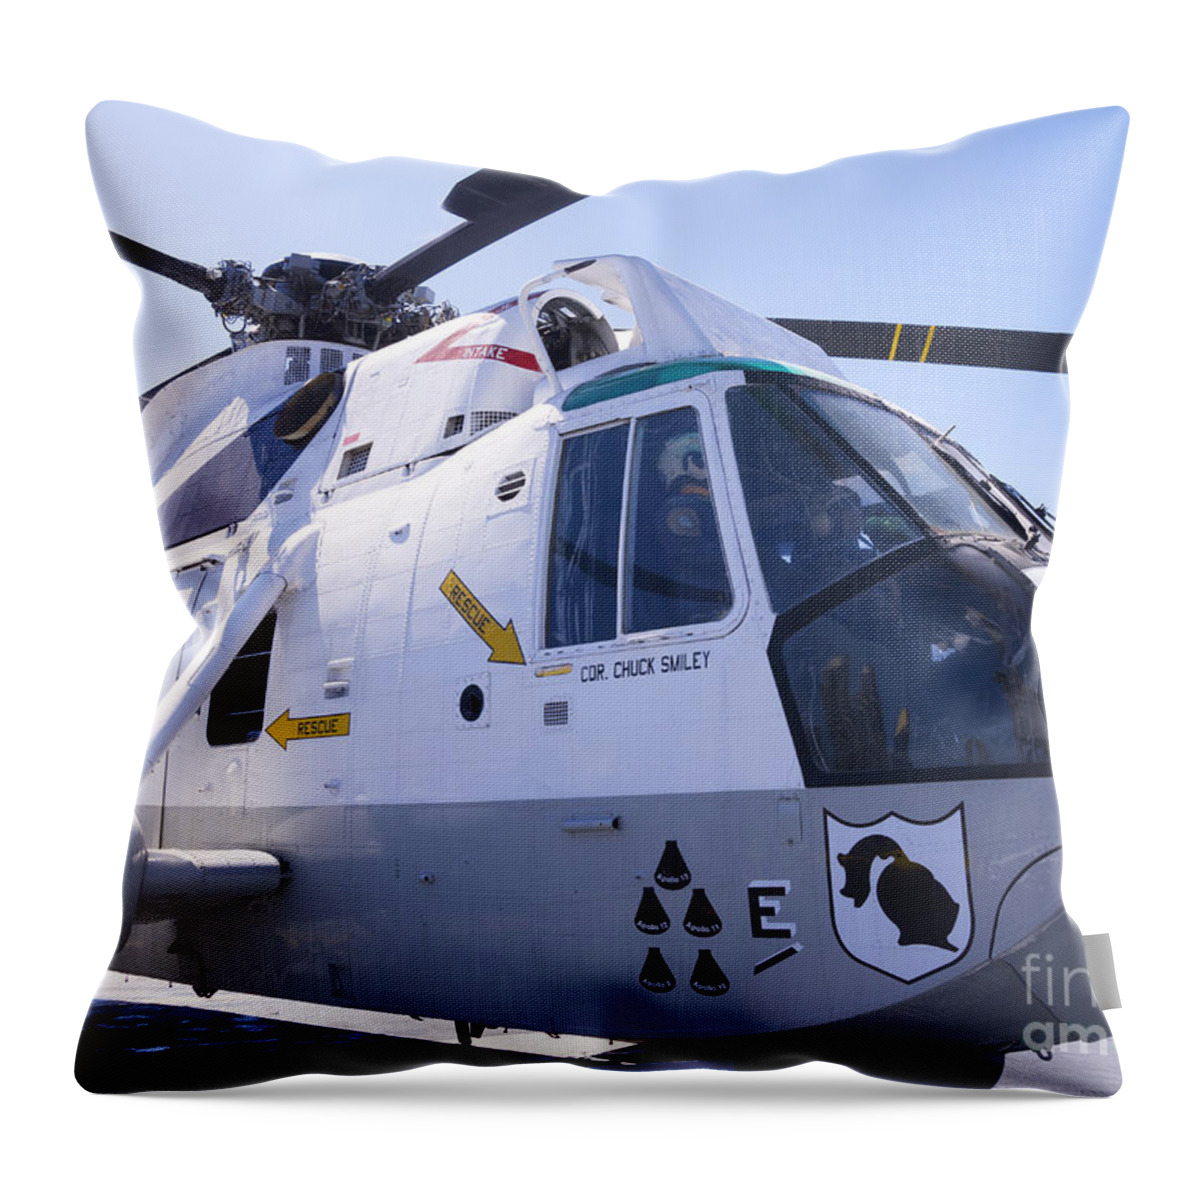 Ships Throw Pillow featuring the photograph Sea King Military Helicopter by Brenda Kean